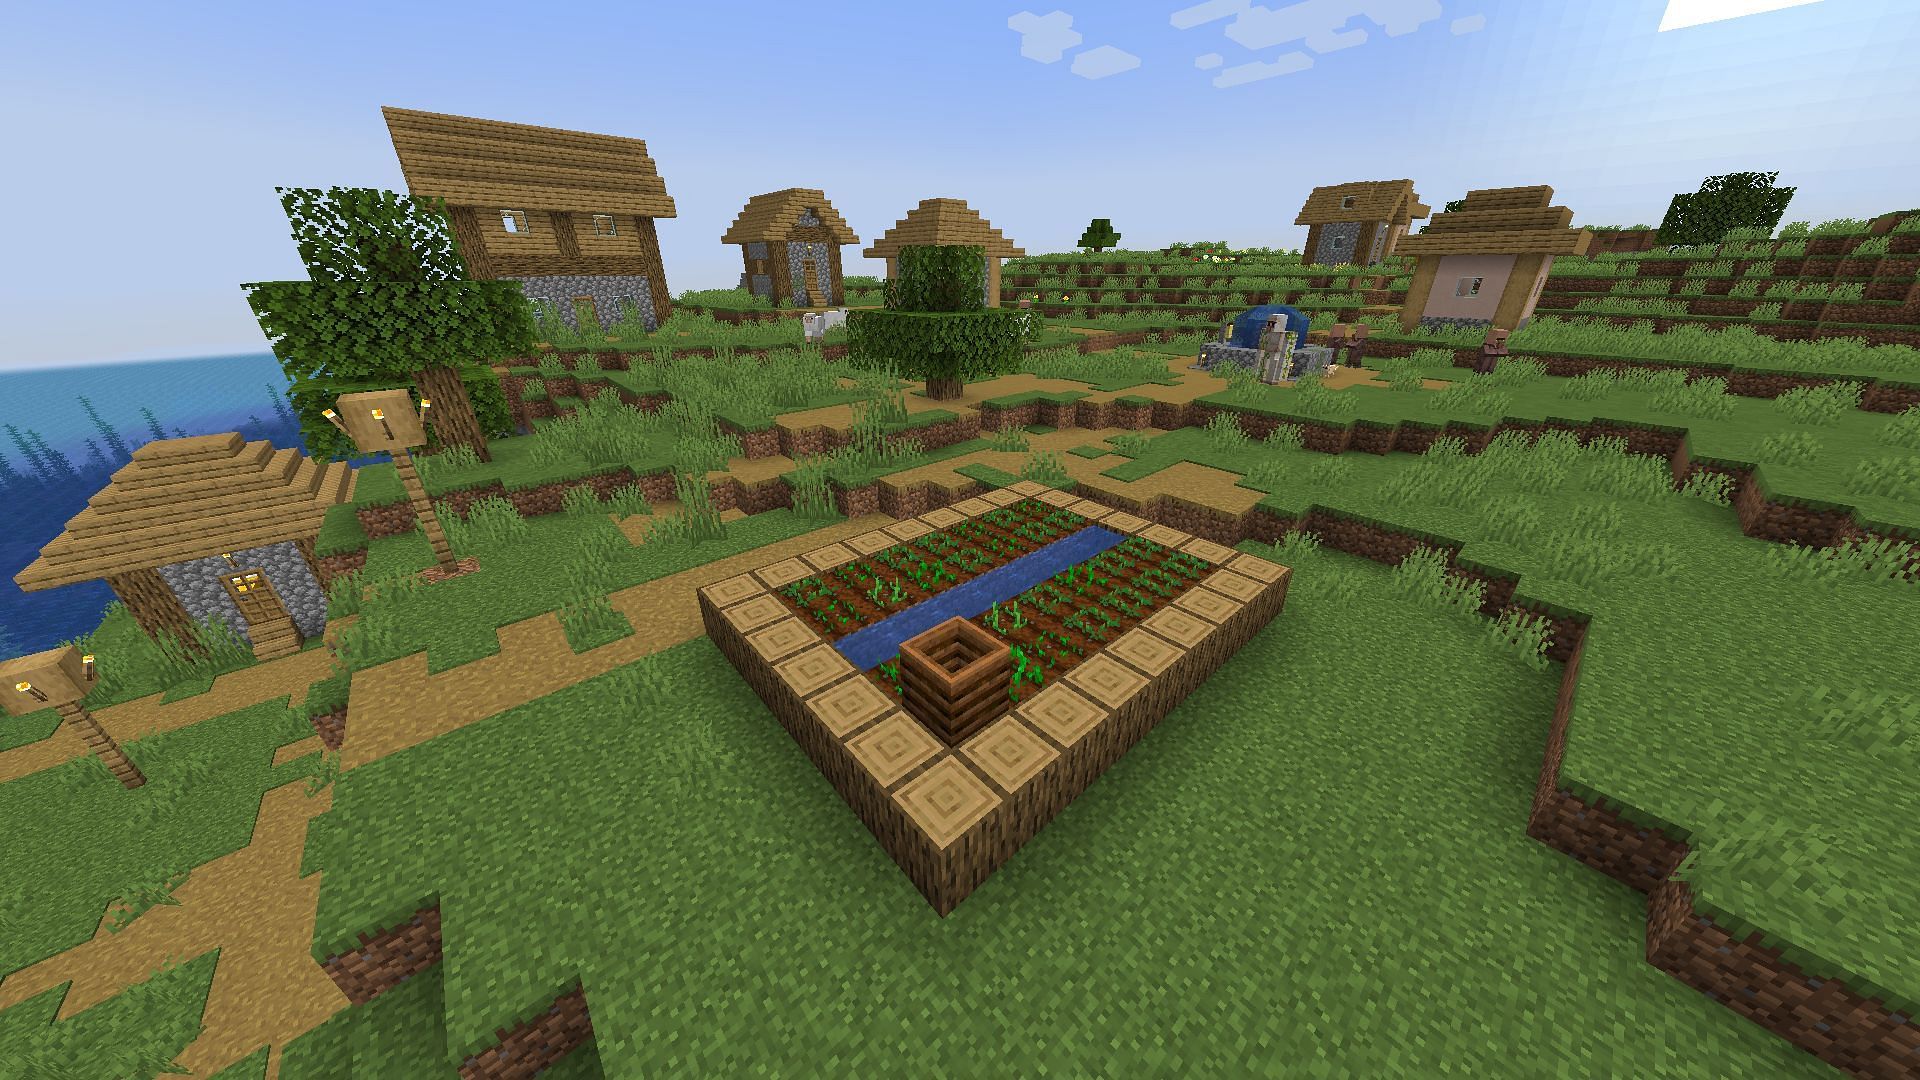 Players will directly spawn on a farm inside the Minecraft village (Image via Mojang)